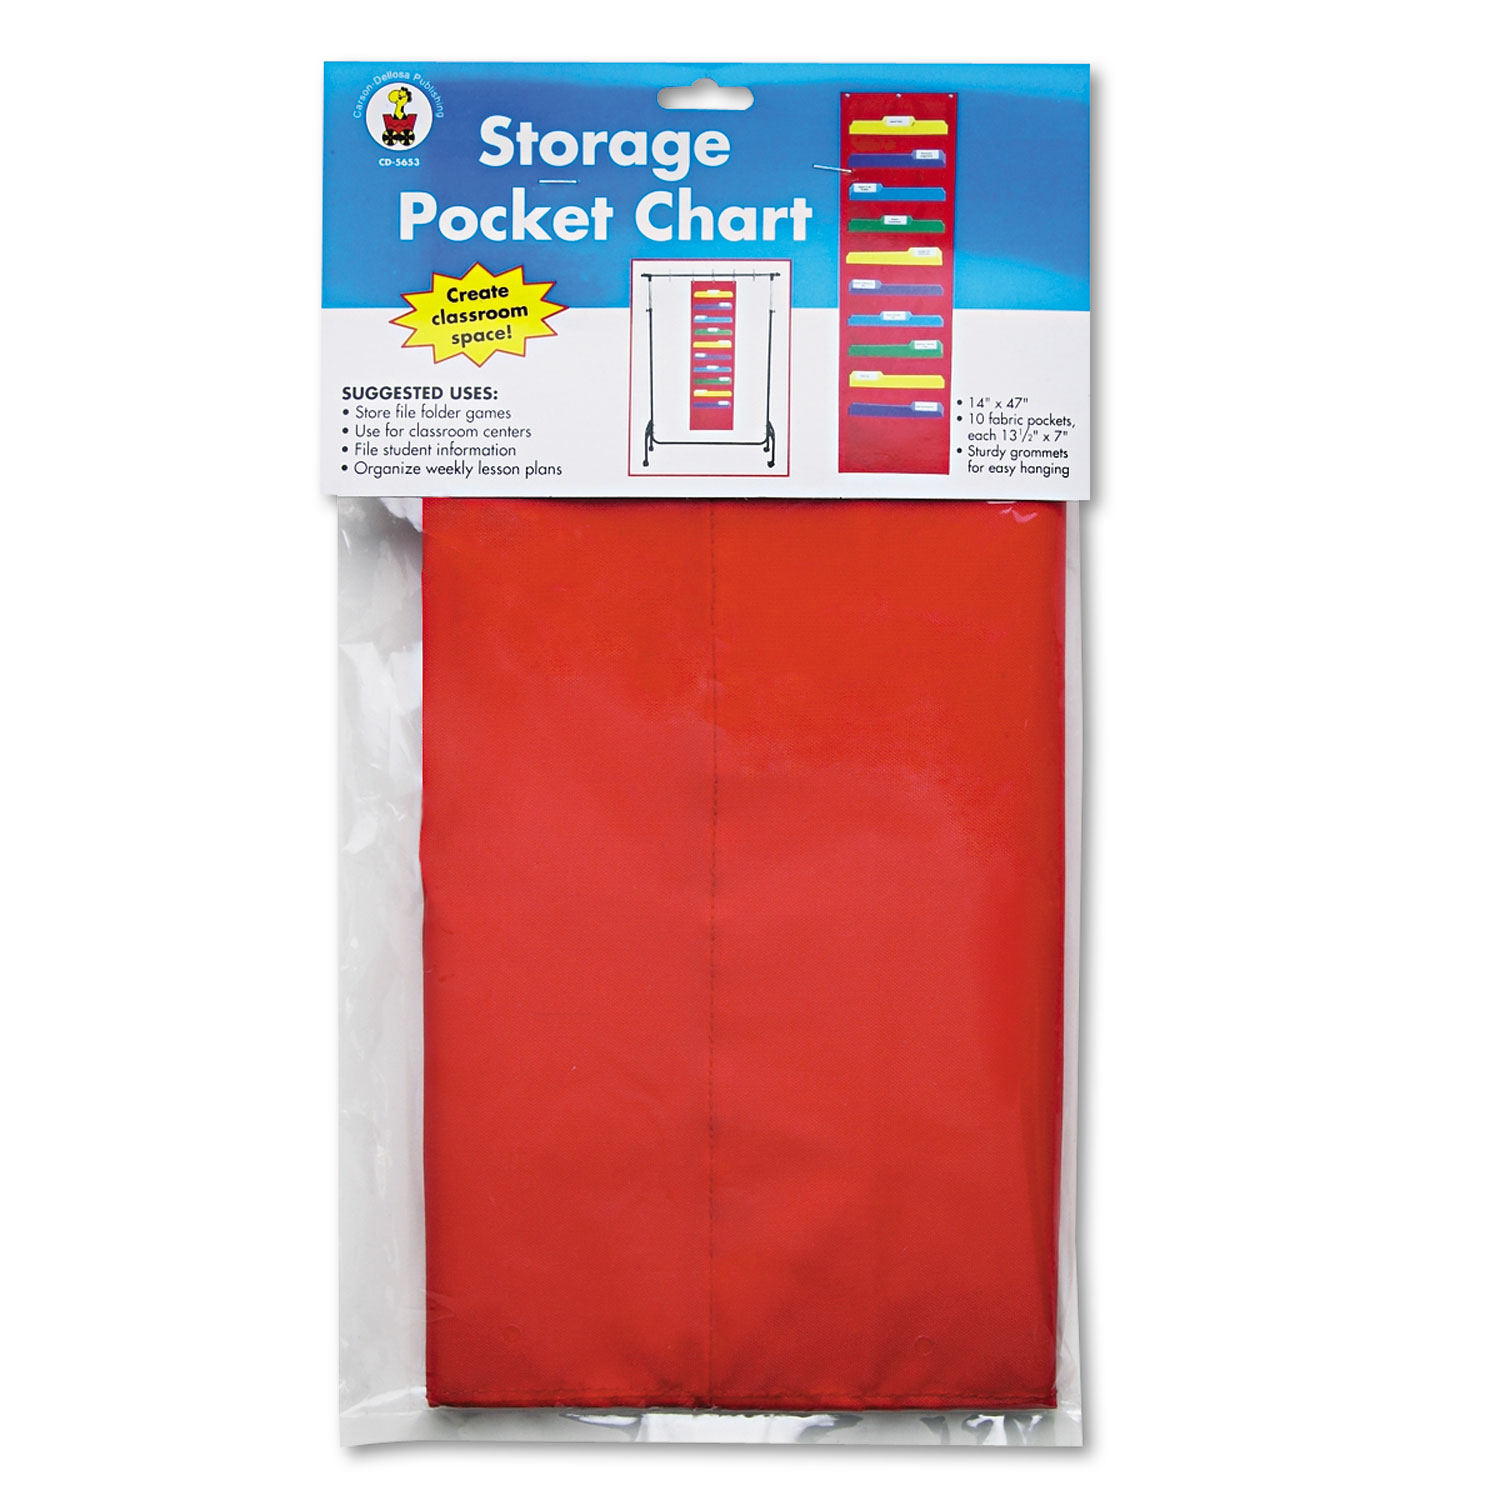 Storage Pocket Chart with 10 13 1/2 x 7 Pockets, Hanger Grommets, 14 x 47